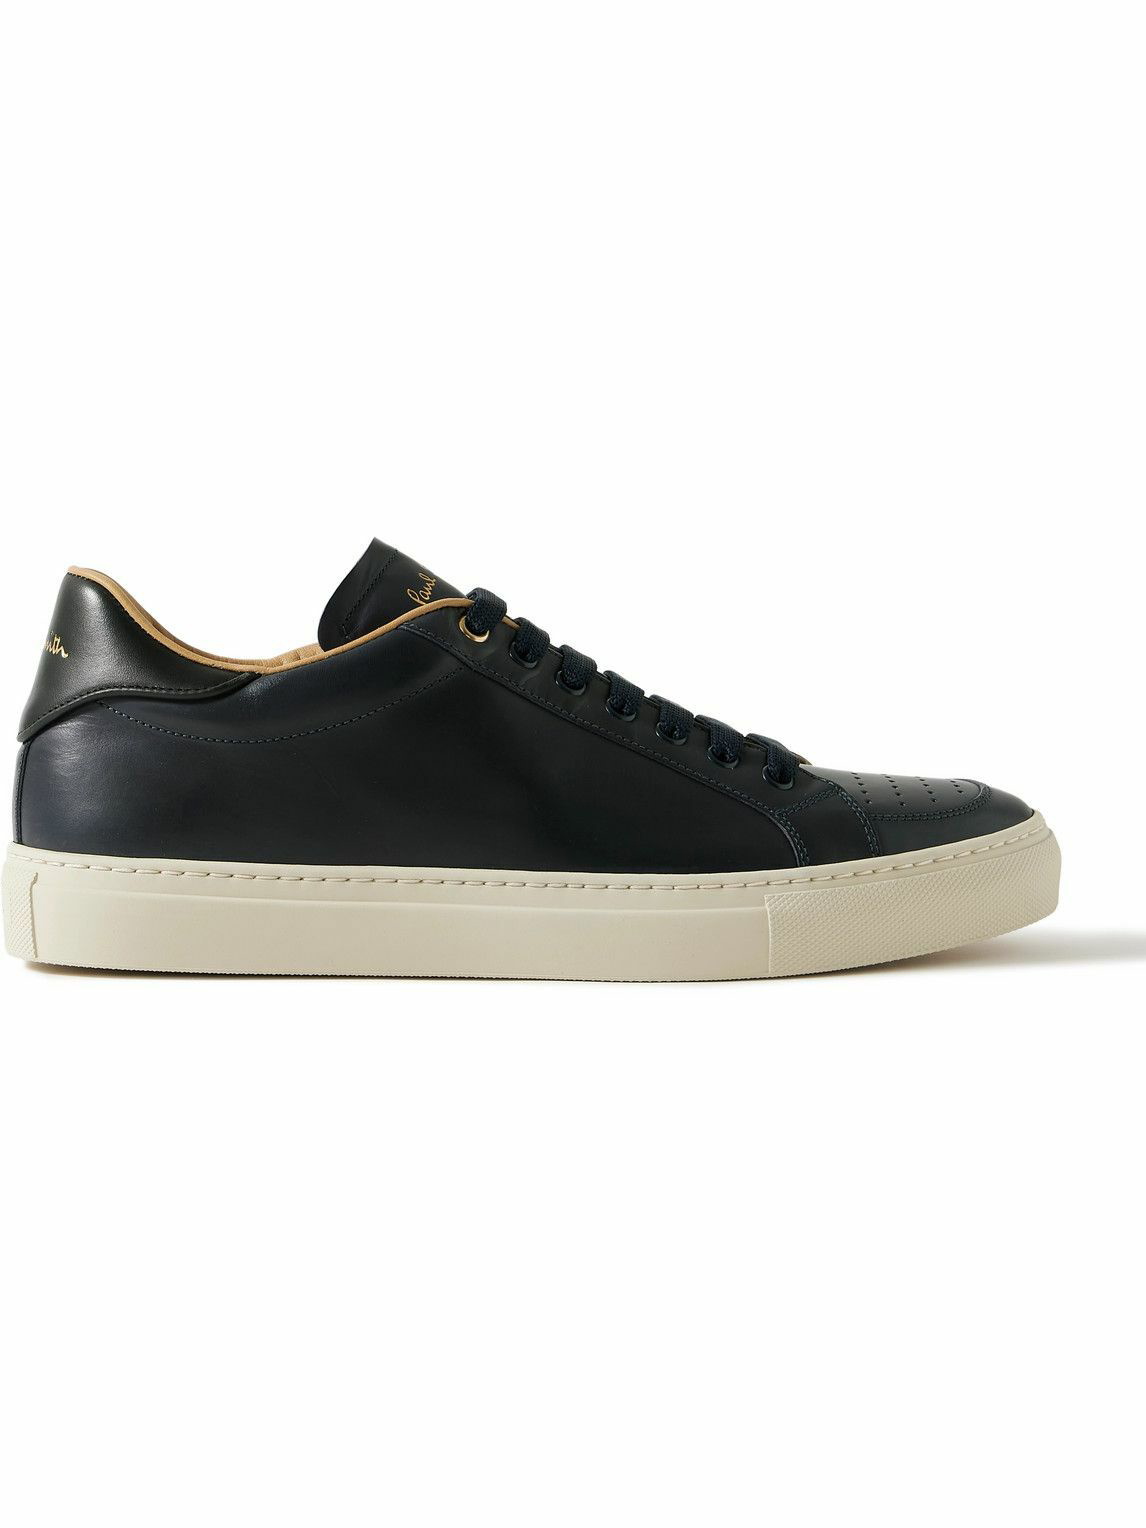 Photo: Paul Smith - Banff Leather Sneakers - Blue